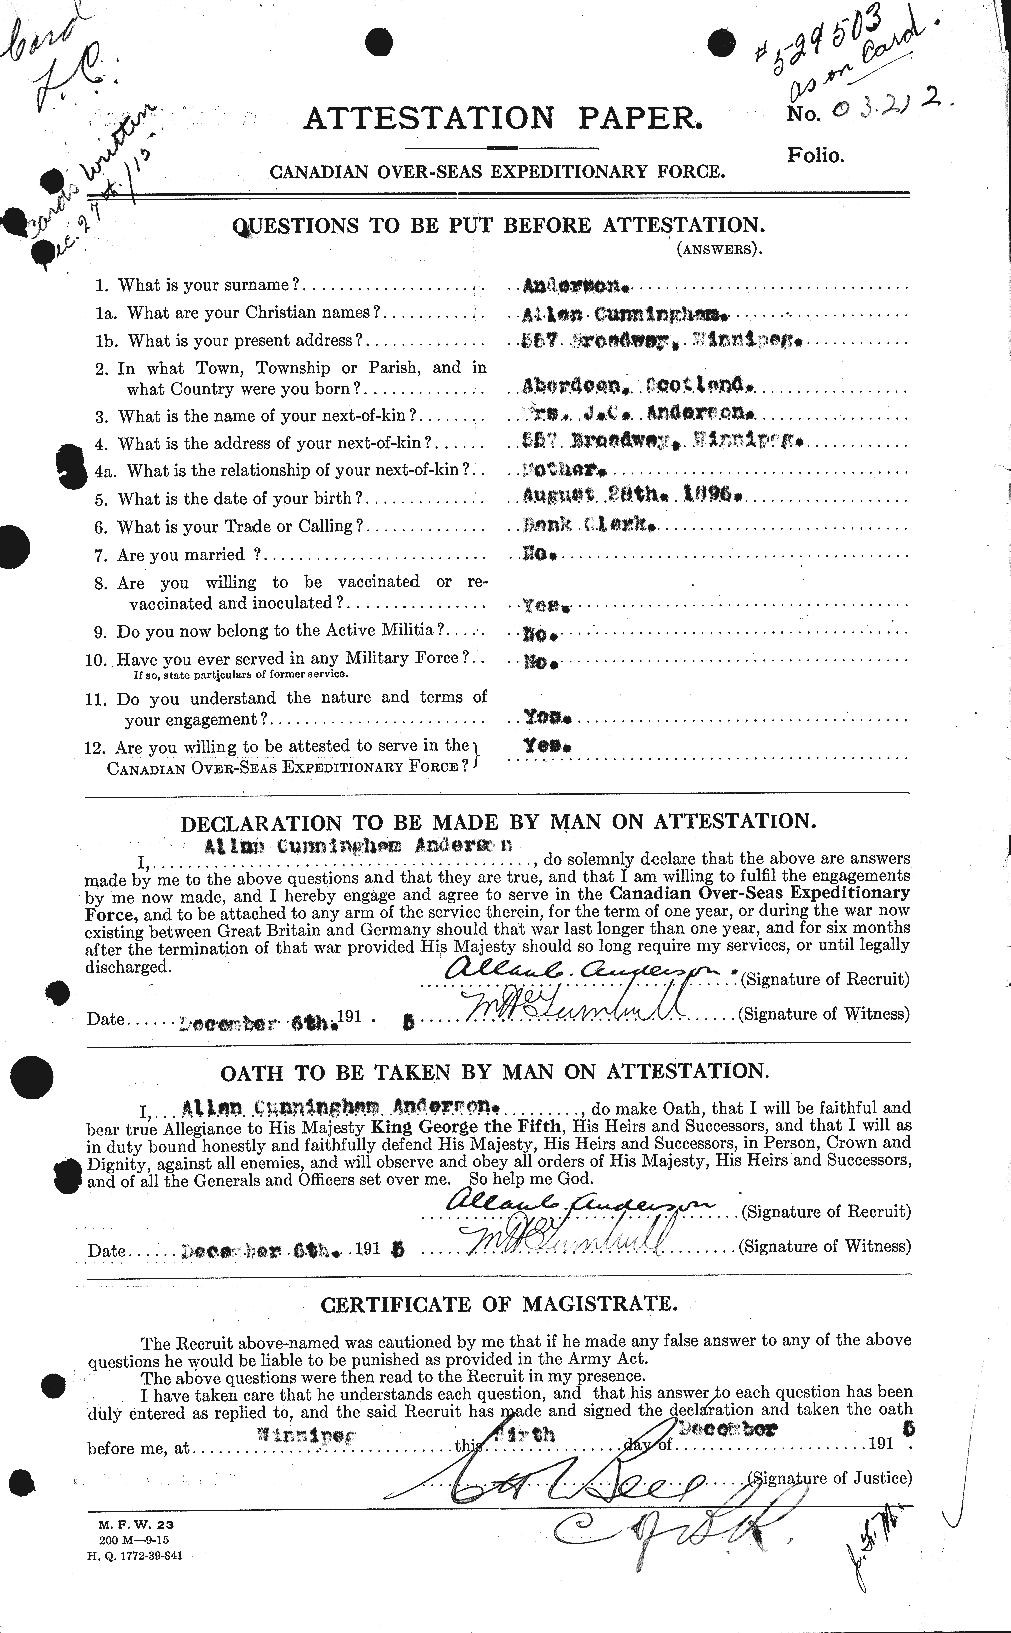 Personnel Records of the First World War - CEF 209444a